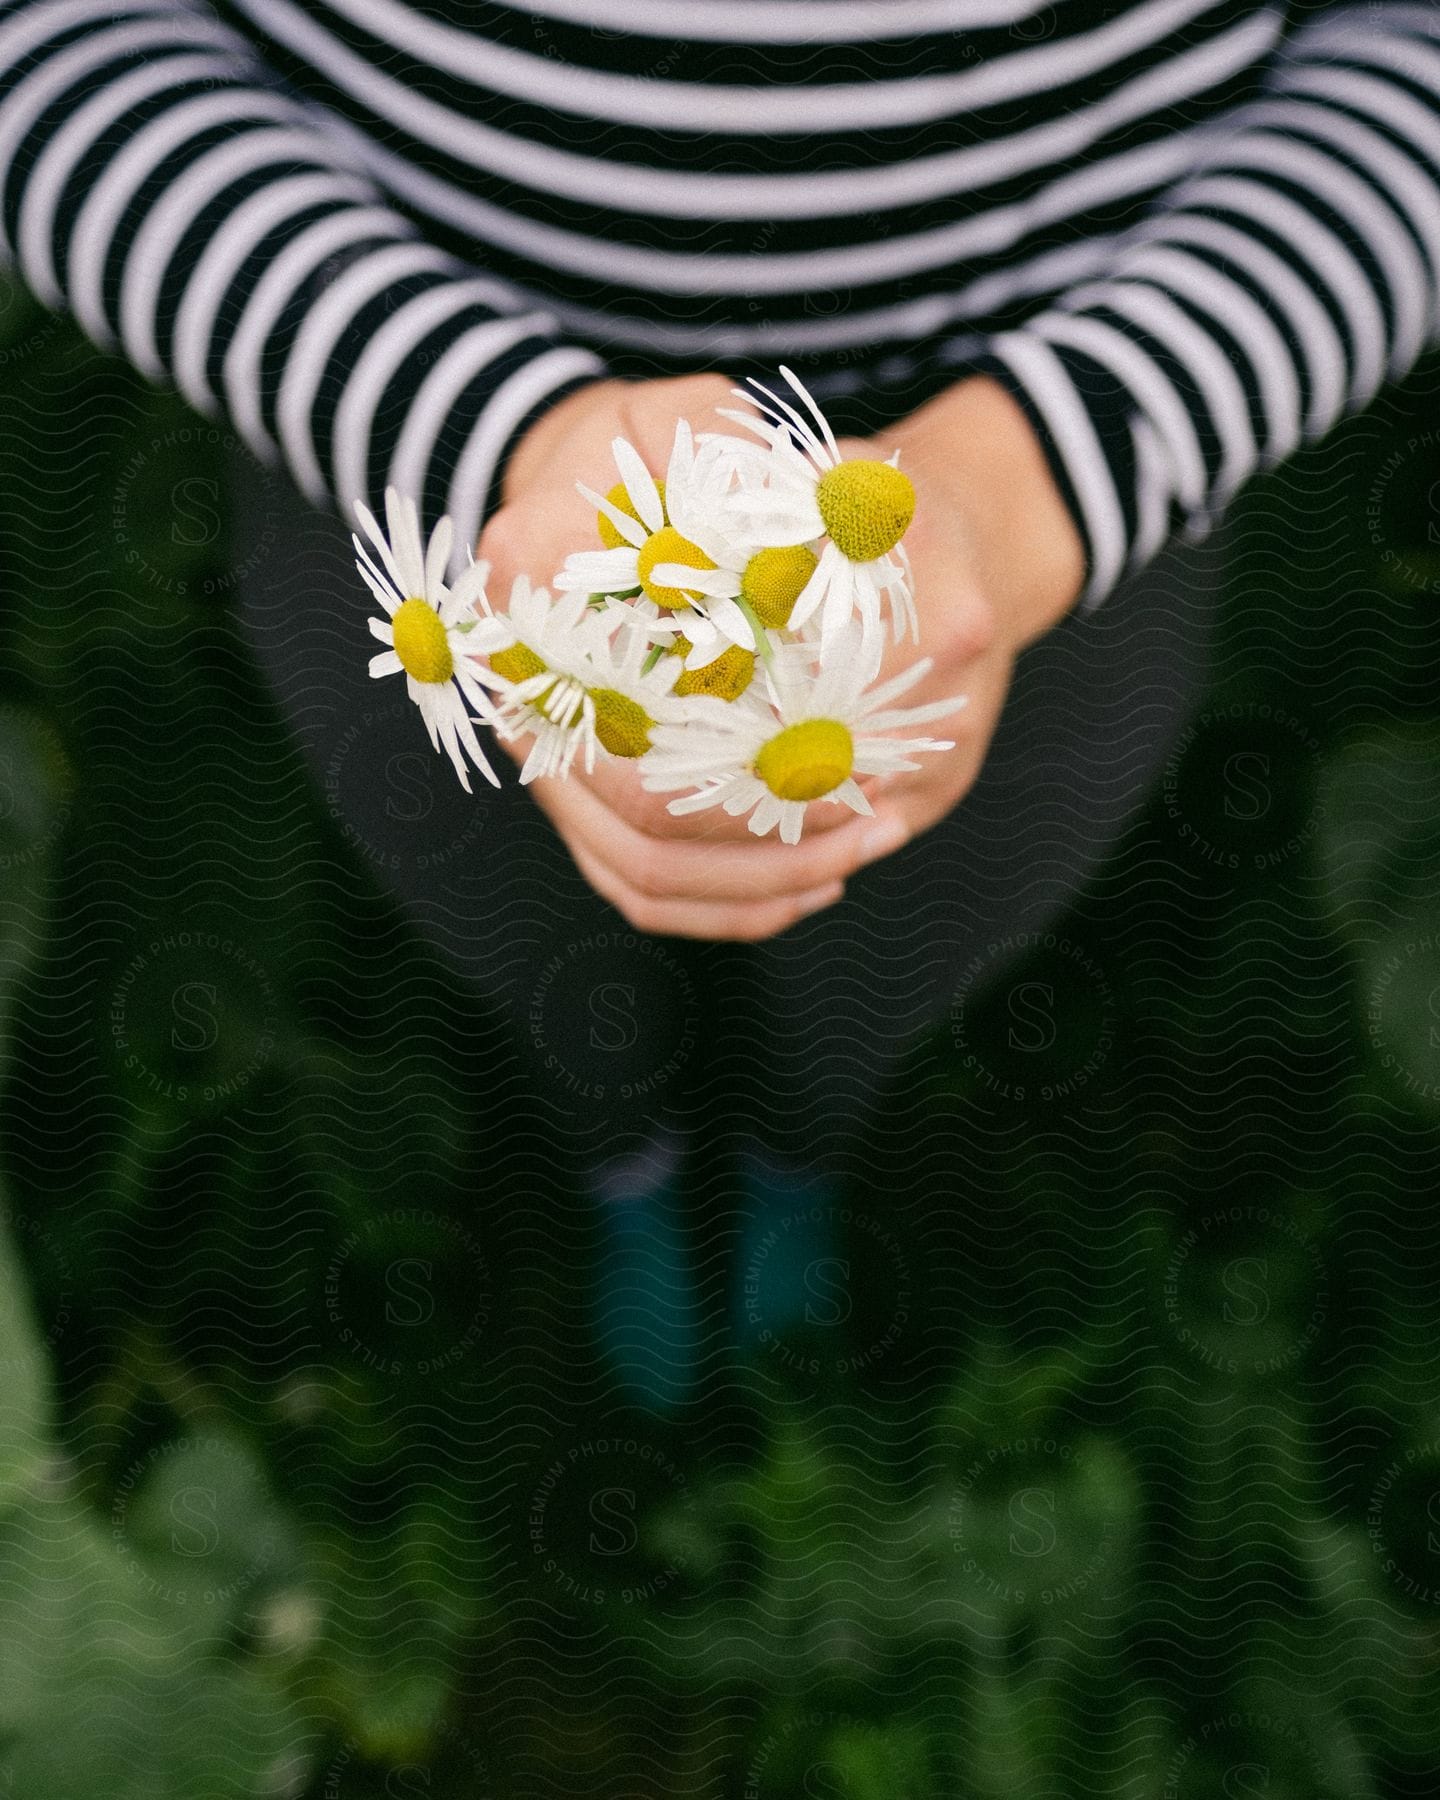 A person is holding flowers while standing on grassland during the daytime